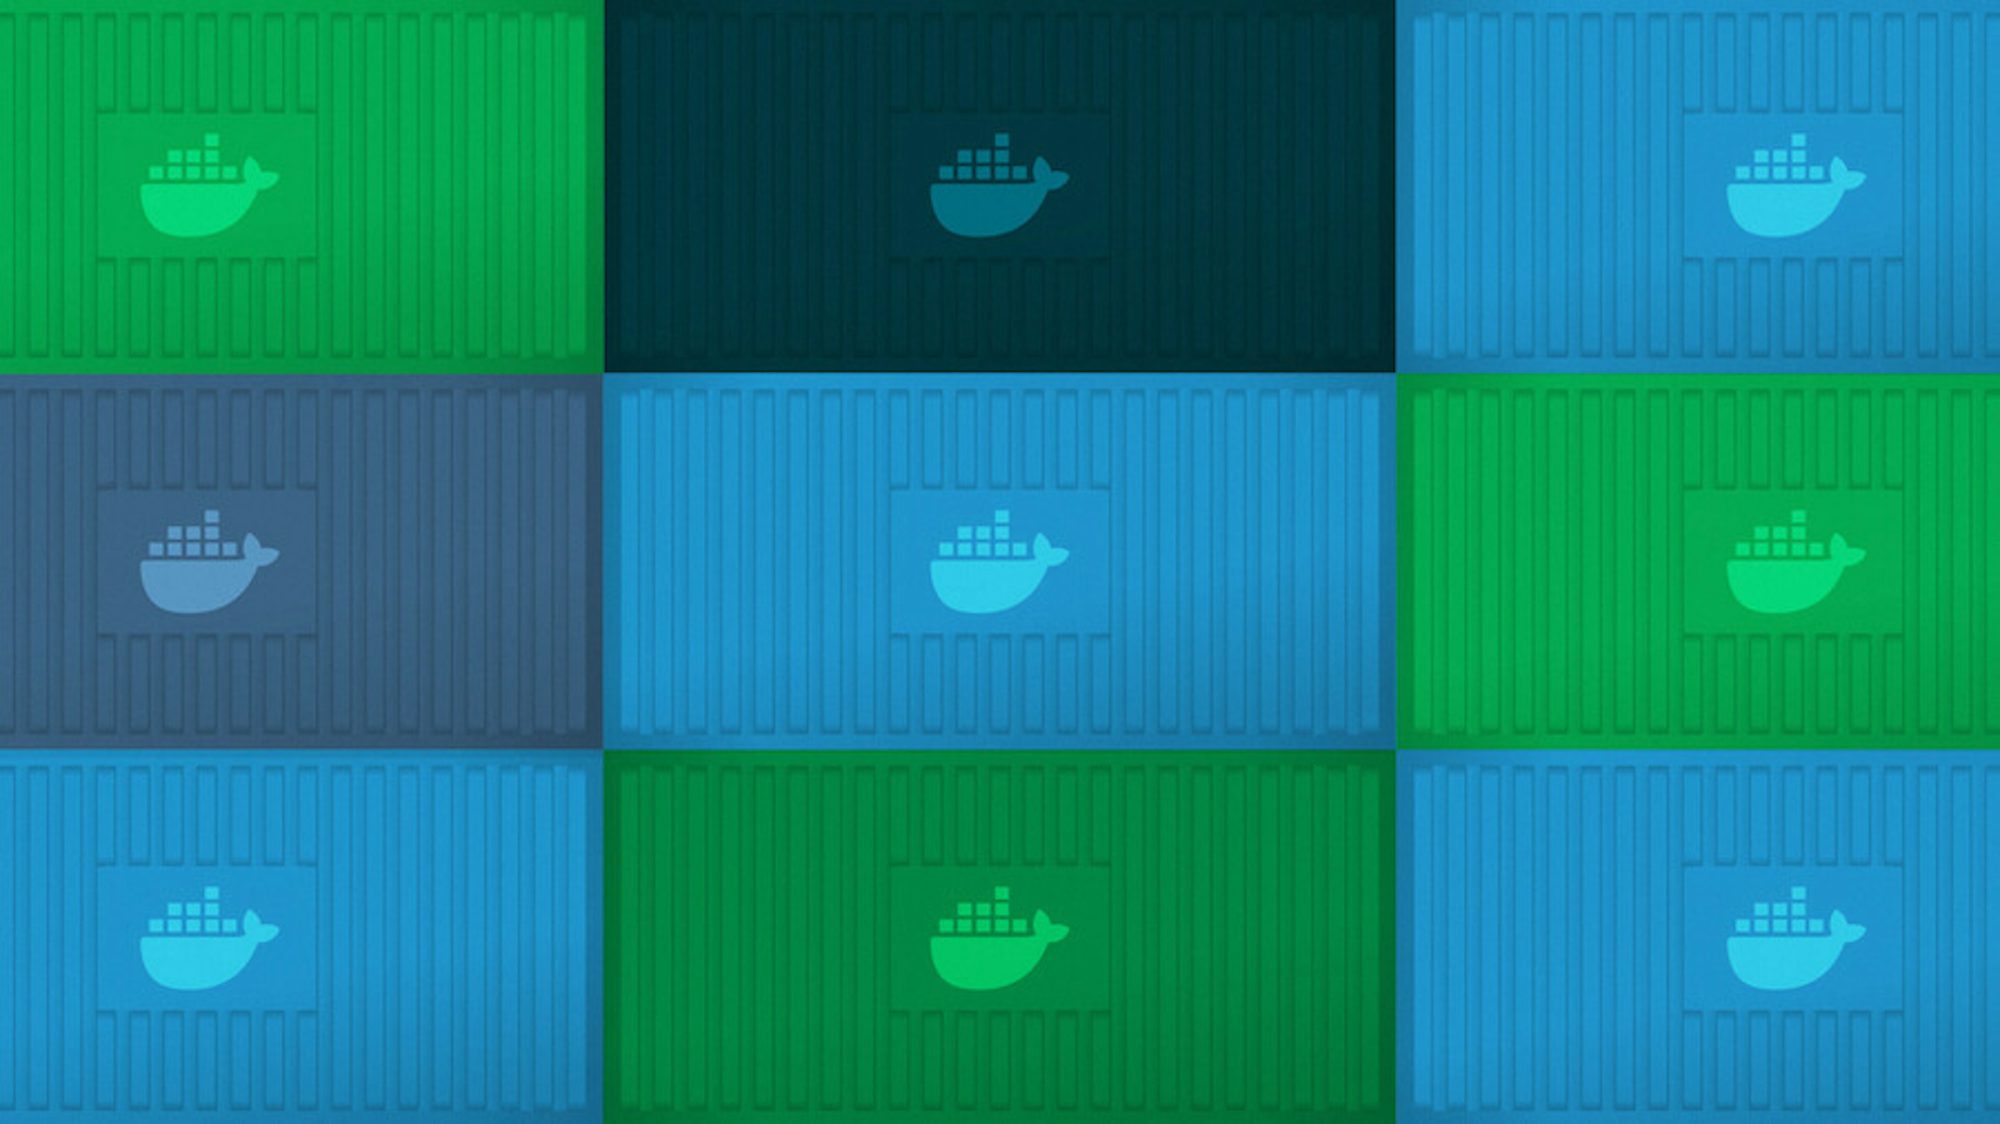 Various blue and green shipping containers stacked in a 3x3 grid, each has a docker logo on the side.